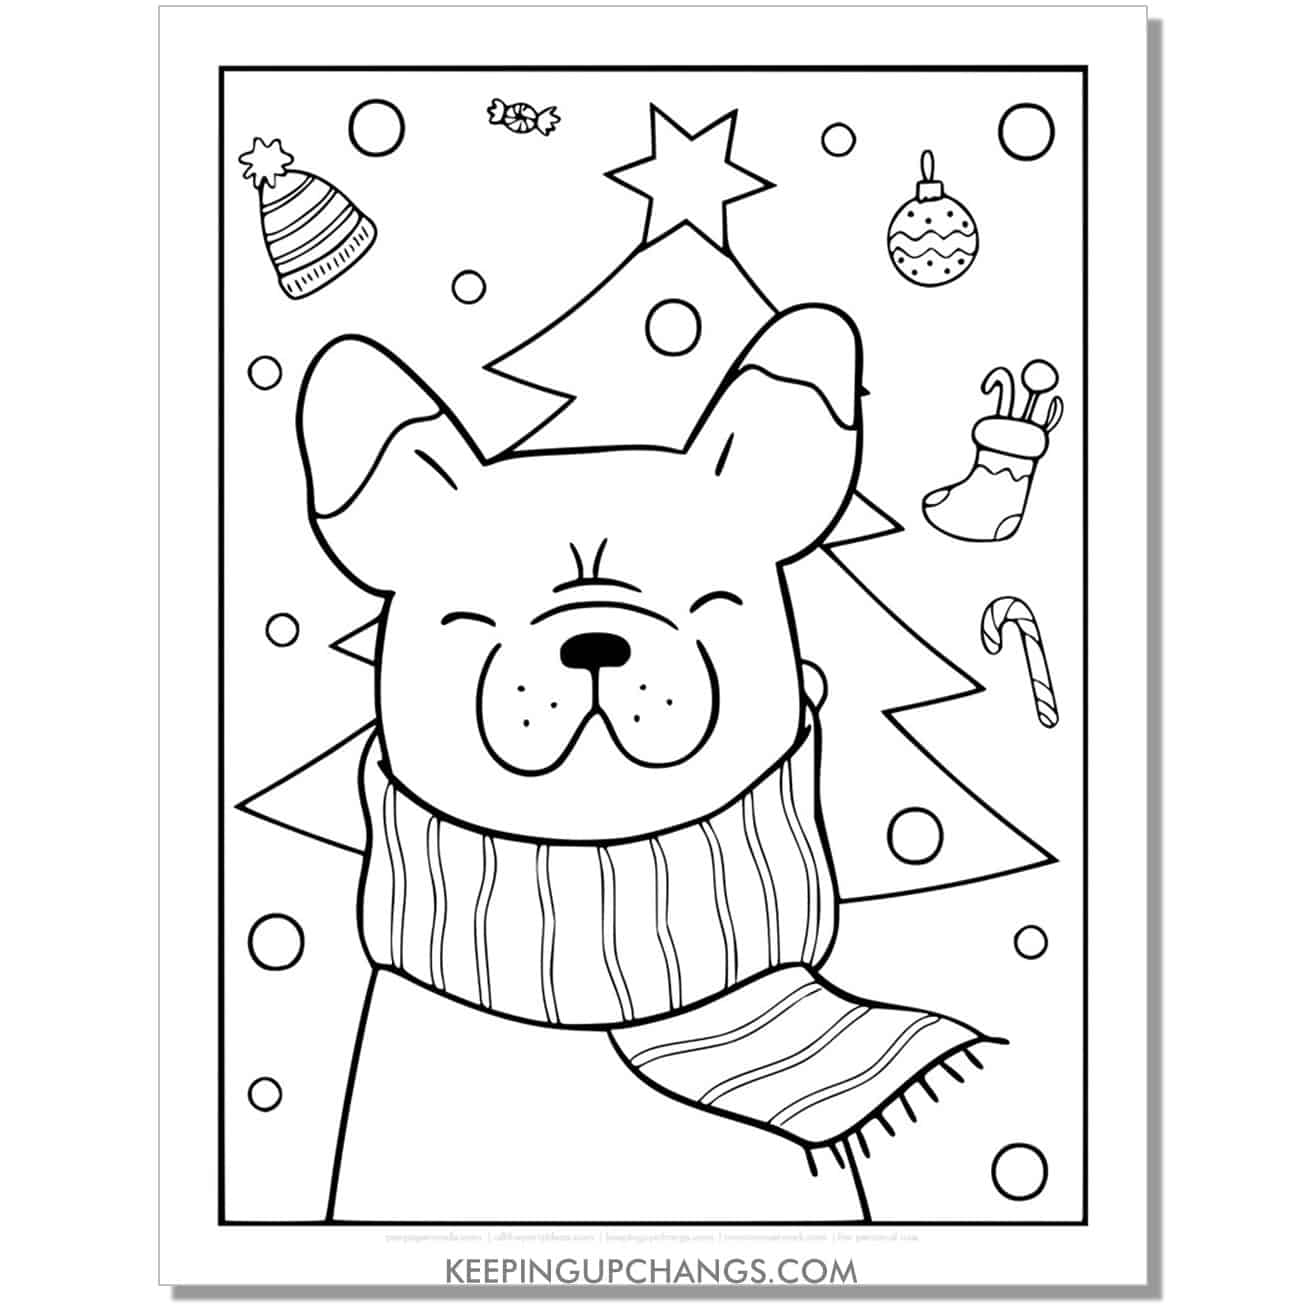 free dog with tree, ornaments, candy canes, stockings full size christmas animal coloring page.